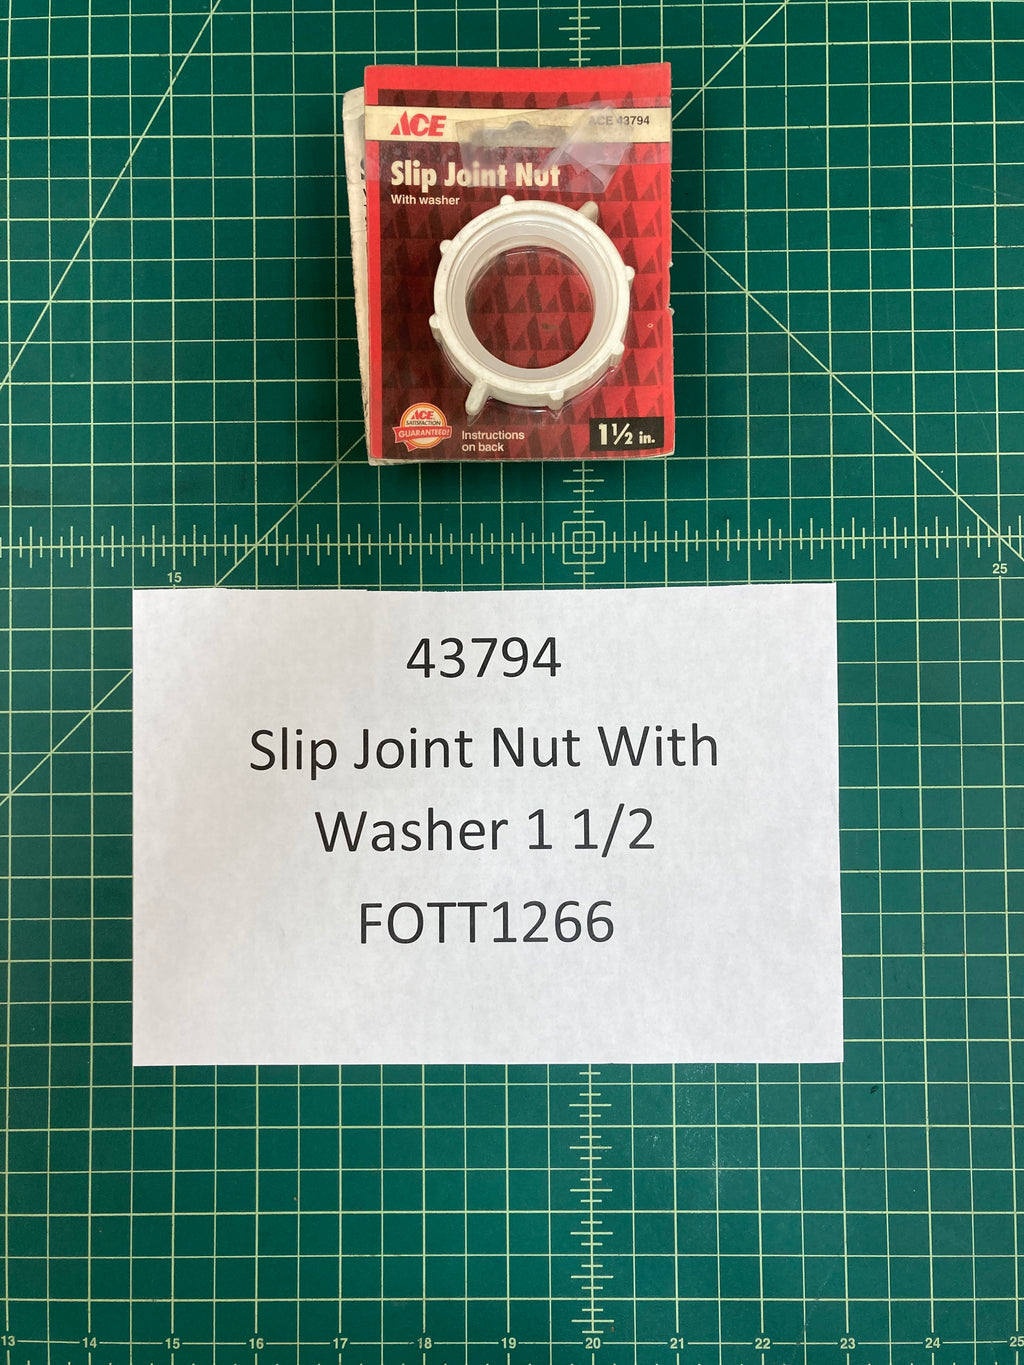 Slip Joint Nut With Washer 1 1/2